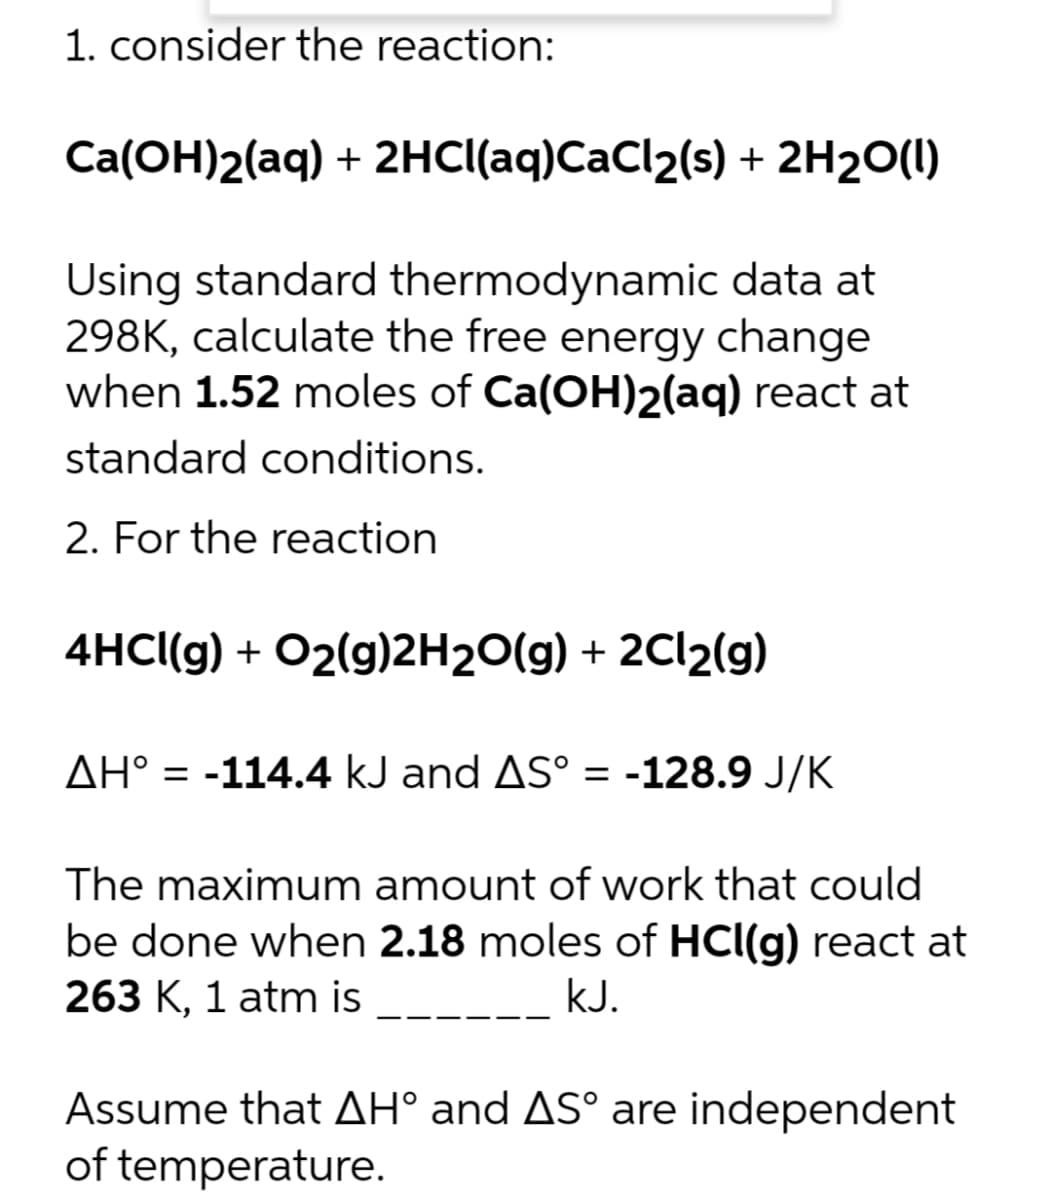 1. consider the reaction:
Ca(OH)2(aq) + 2HCl(aq)CaCl₂(s) + 2H₂O(l)
Using standard thermodynamic data at
298K, calculate the free energy change
when 1.52 moles of Ca(OH)2(aq) react at
standard conditions.
2. For the reaction
4HCl(g) + O2(g)2H₂O(g) + 2Cl₂(g)
AH° -114.4 kJ and AS° = -128.9 J/K
The maximum amount of work that could
be done when 2.18 moles of HCl(g) react at
263 K, 1 atm is
kJ.
Assume that AH° and AS° are independent
of temperature.